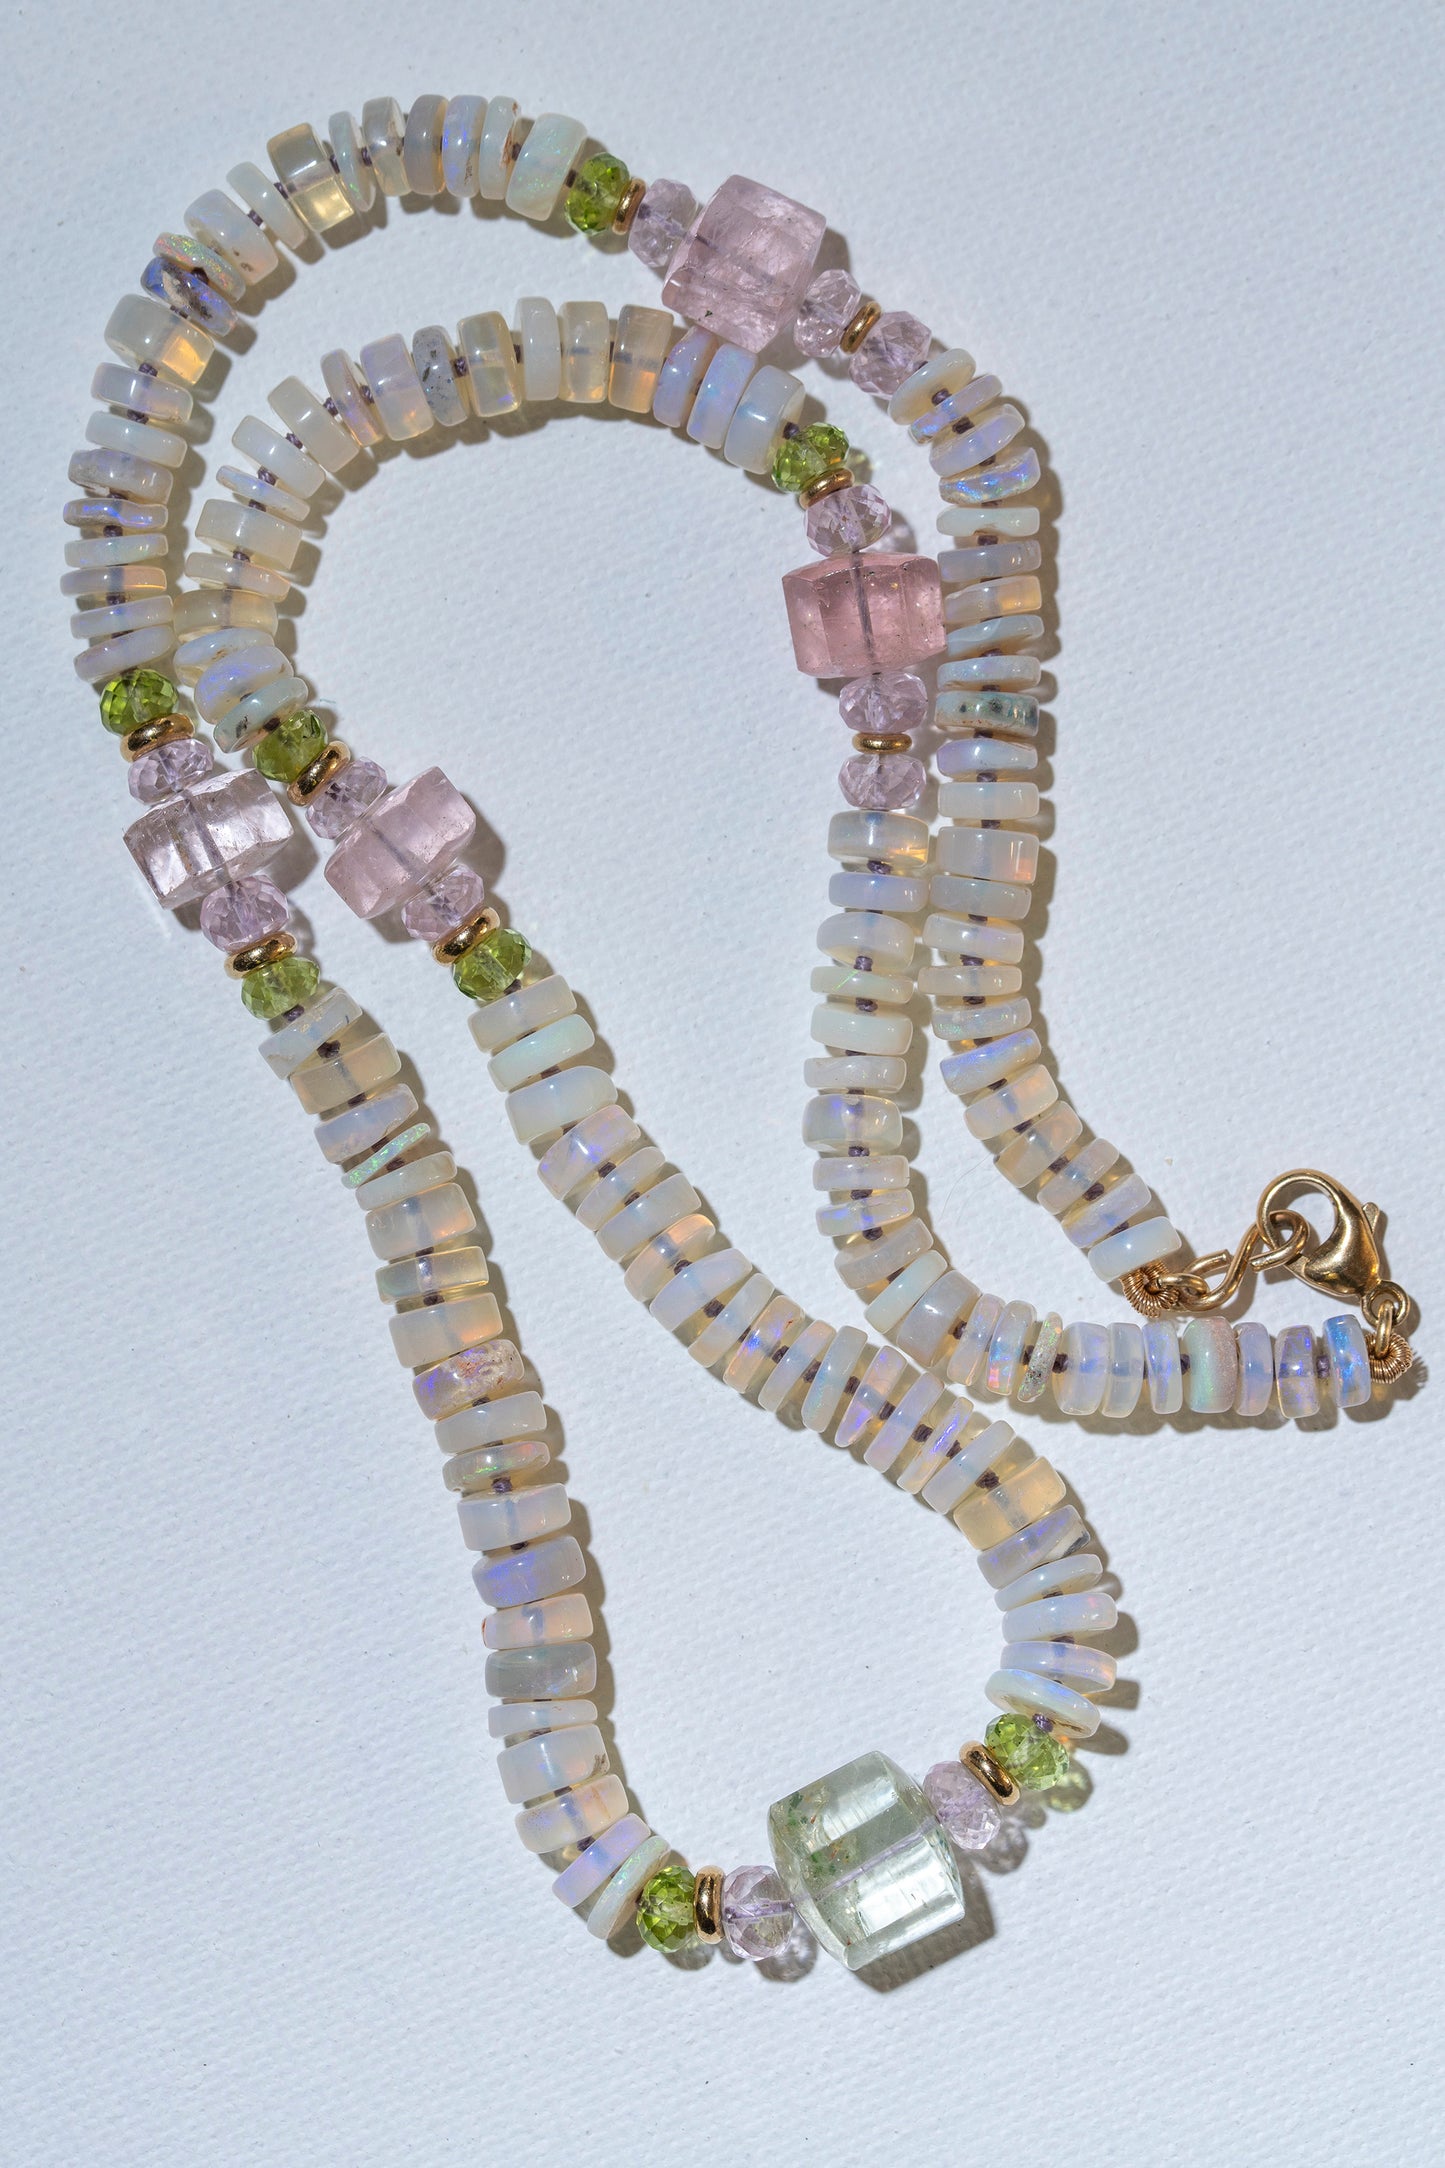 Australian Opals, Beryl and 14k Gold opal candy necklace brittany myra